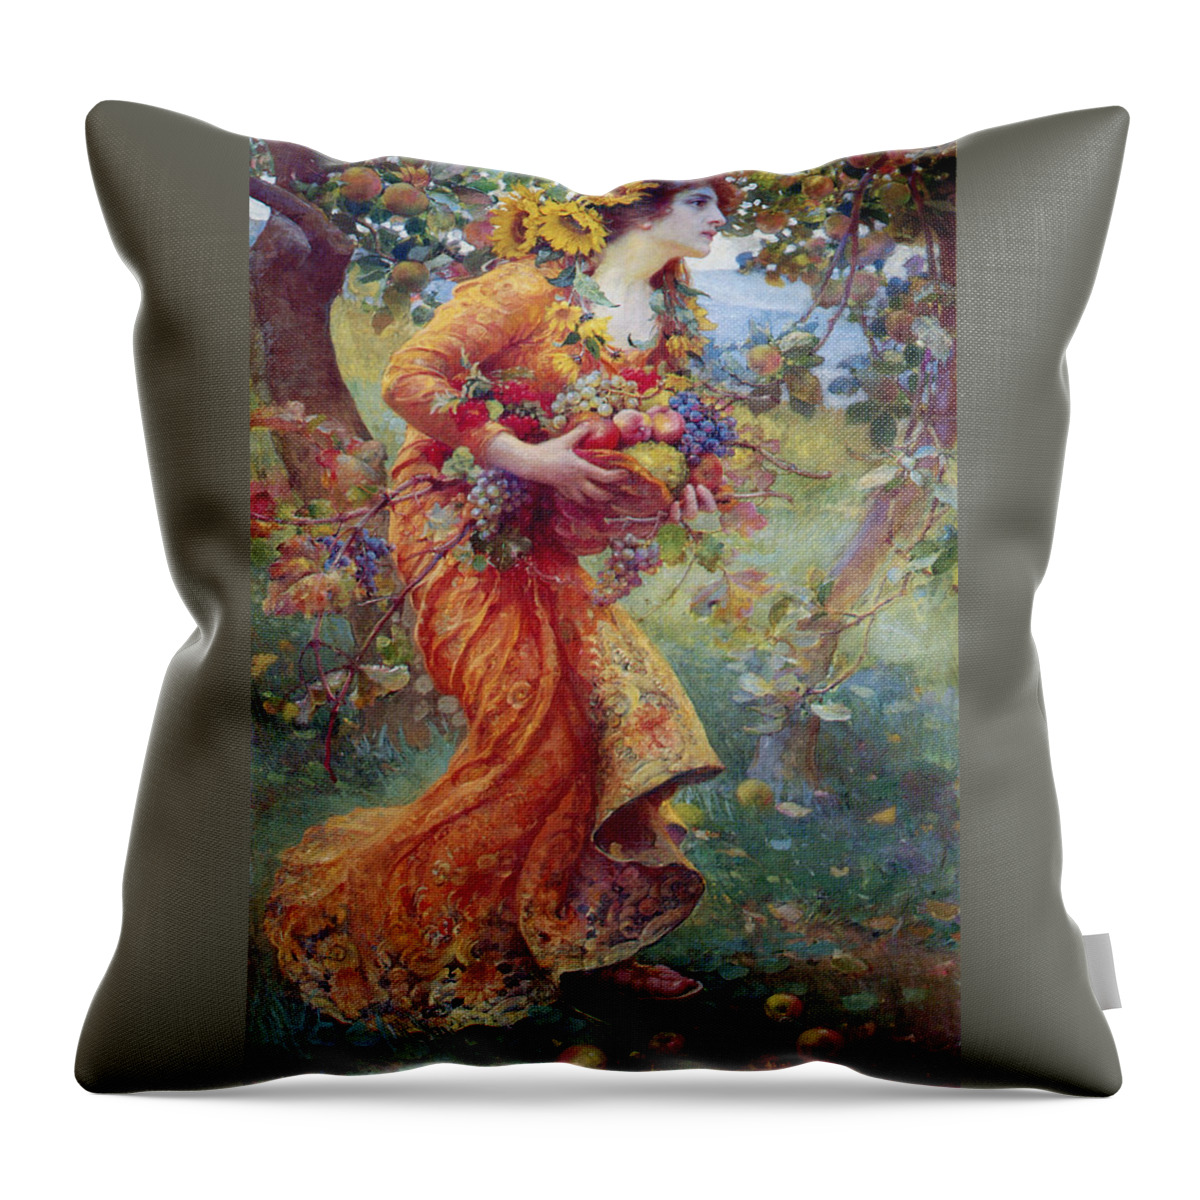 Franz Dvorak - In The Orchard 1912 Throw Pillow featuring the painting In The Orchard by MotionAge Designs